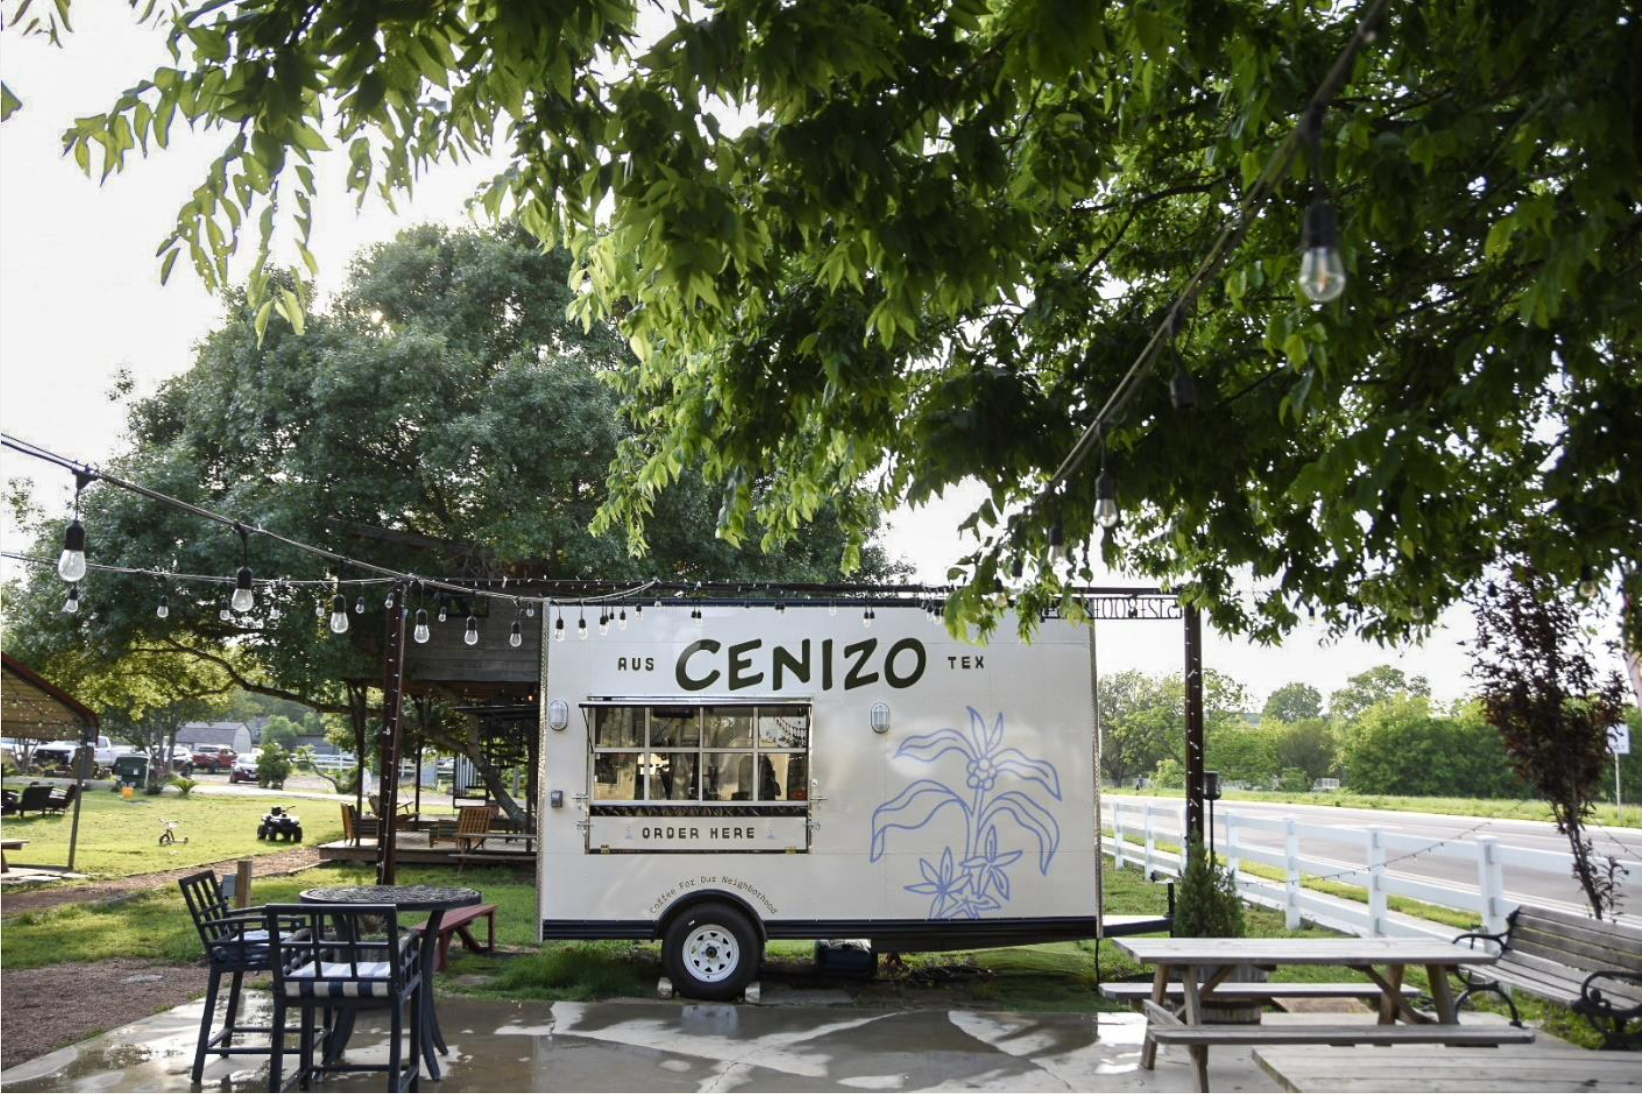 A food truck with a sign reading “Cenizo” parked outside with lots of trees.